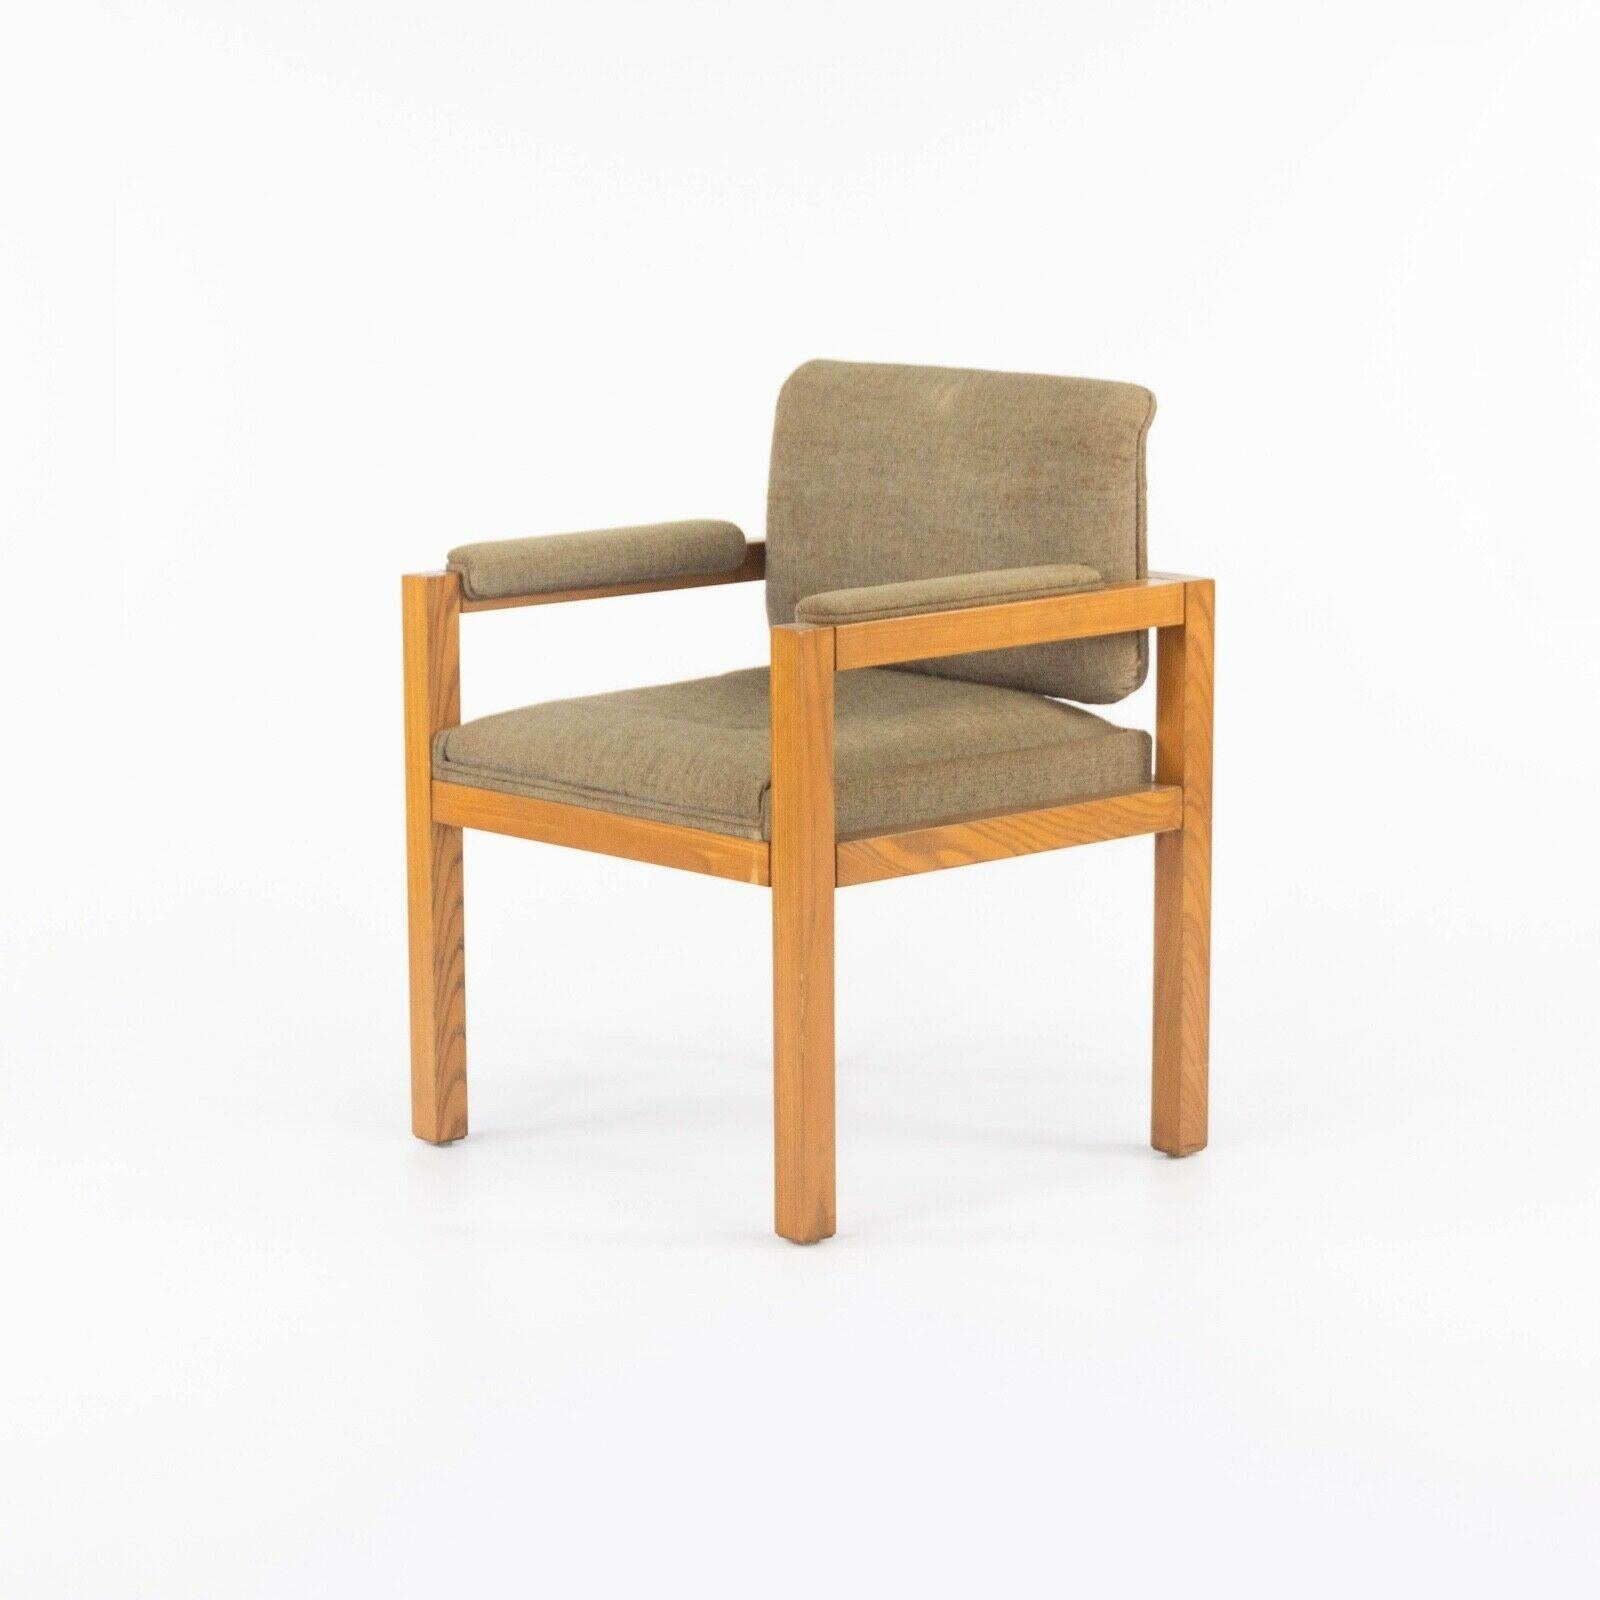 Listed for sale is a circa 1975 production oak and dark tan fabric armchair designed by renowned architect and furniture designer Warren Platner. This piece was part of a series that Platner designed for CI Designs in the 1970s. CI Designs was based